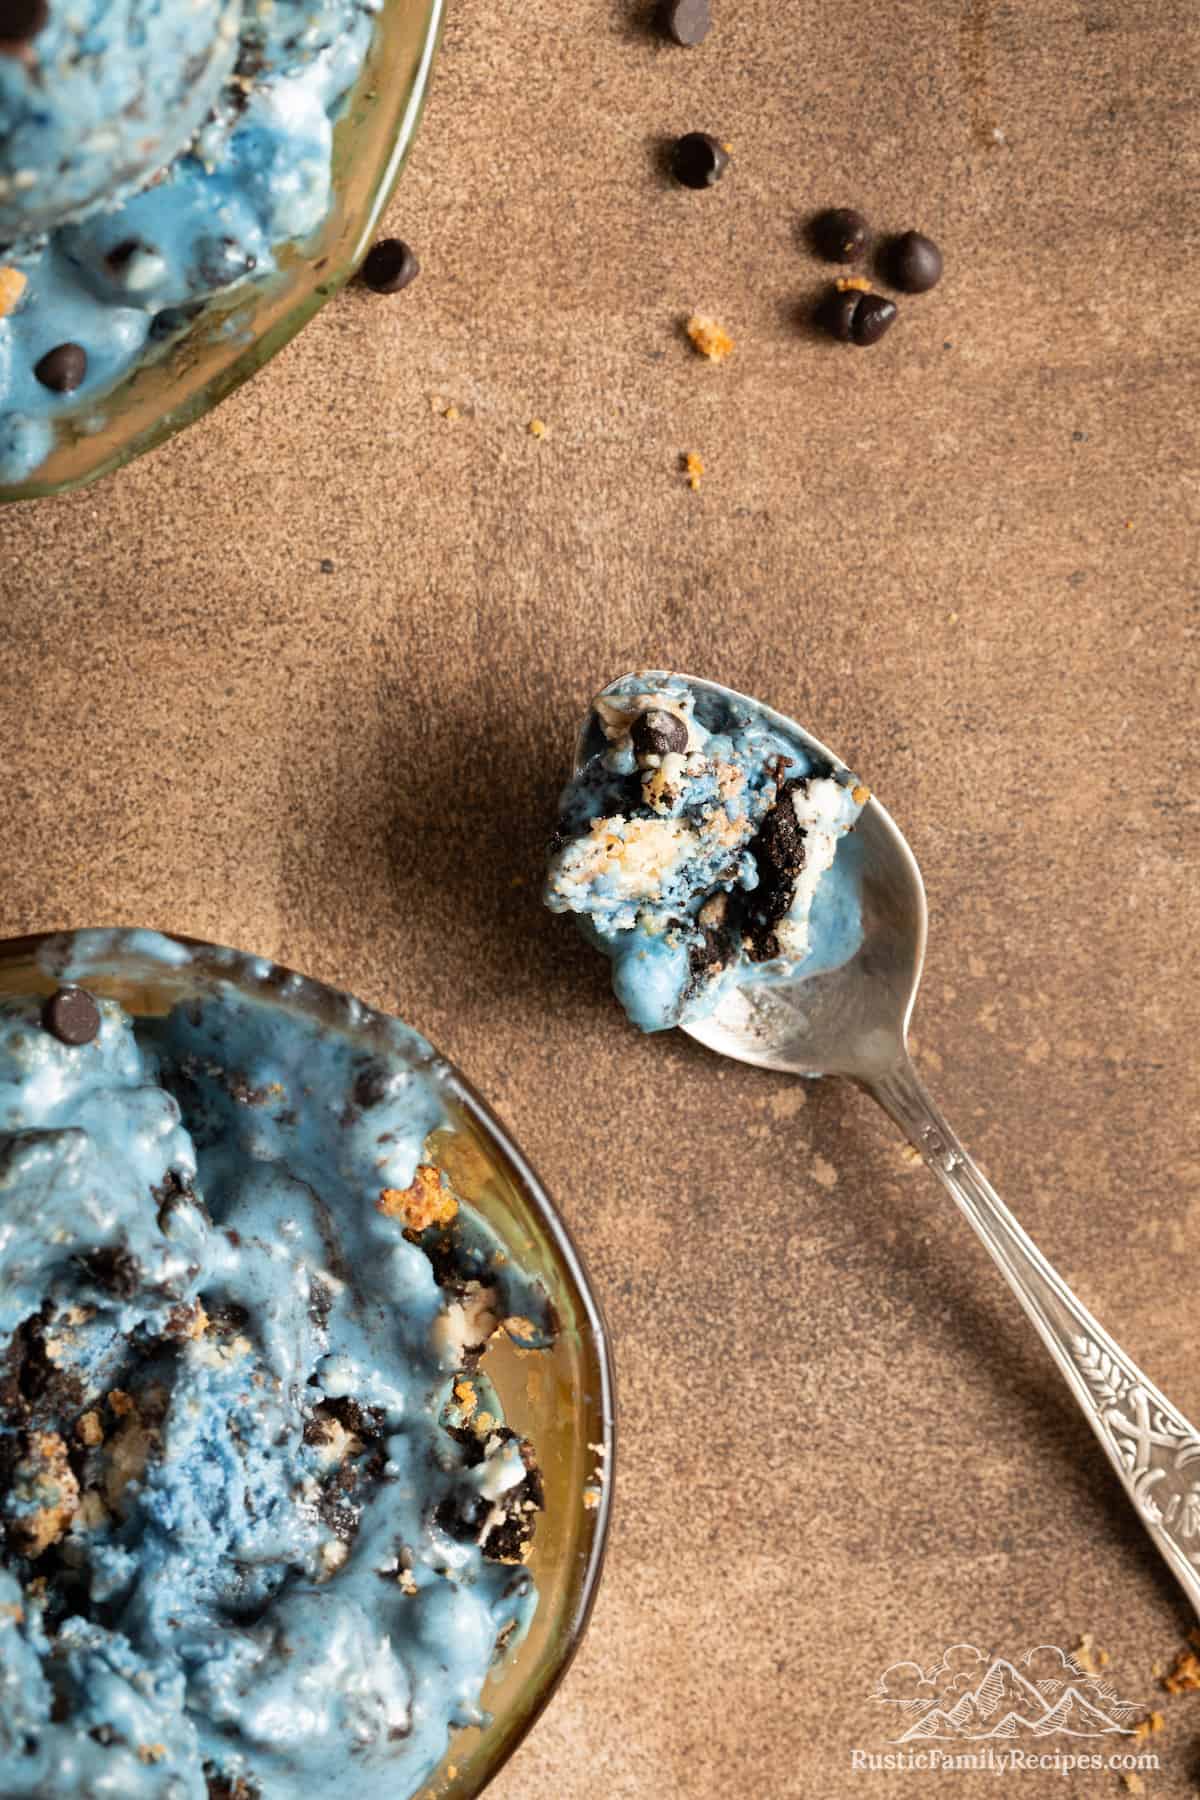 Top view of a spoonful of Cookie Monster ice cream next to a bowlful.